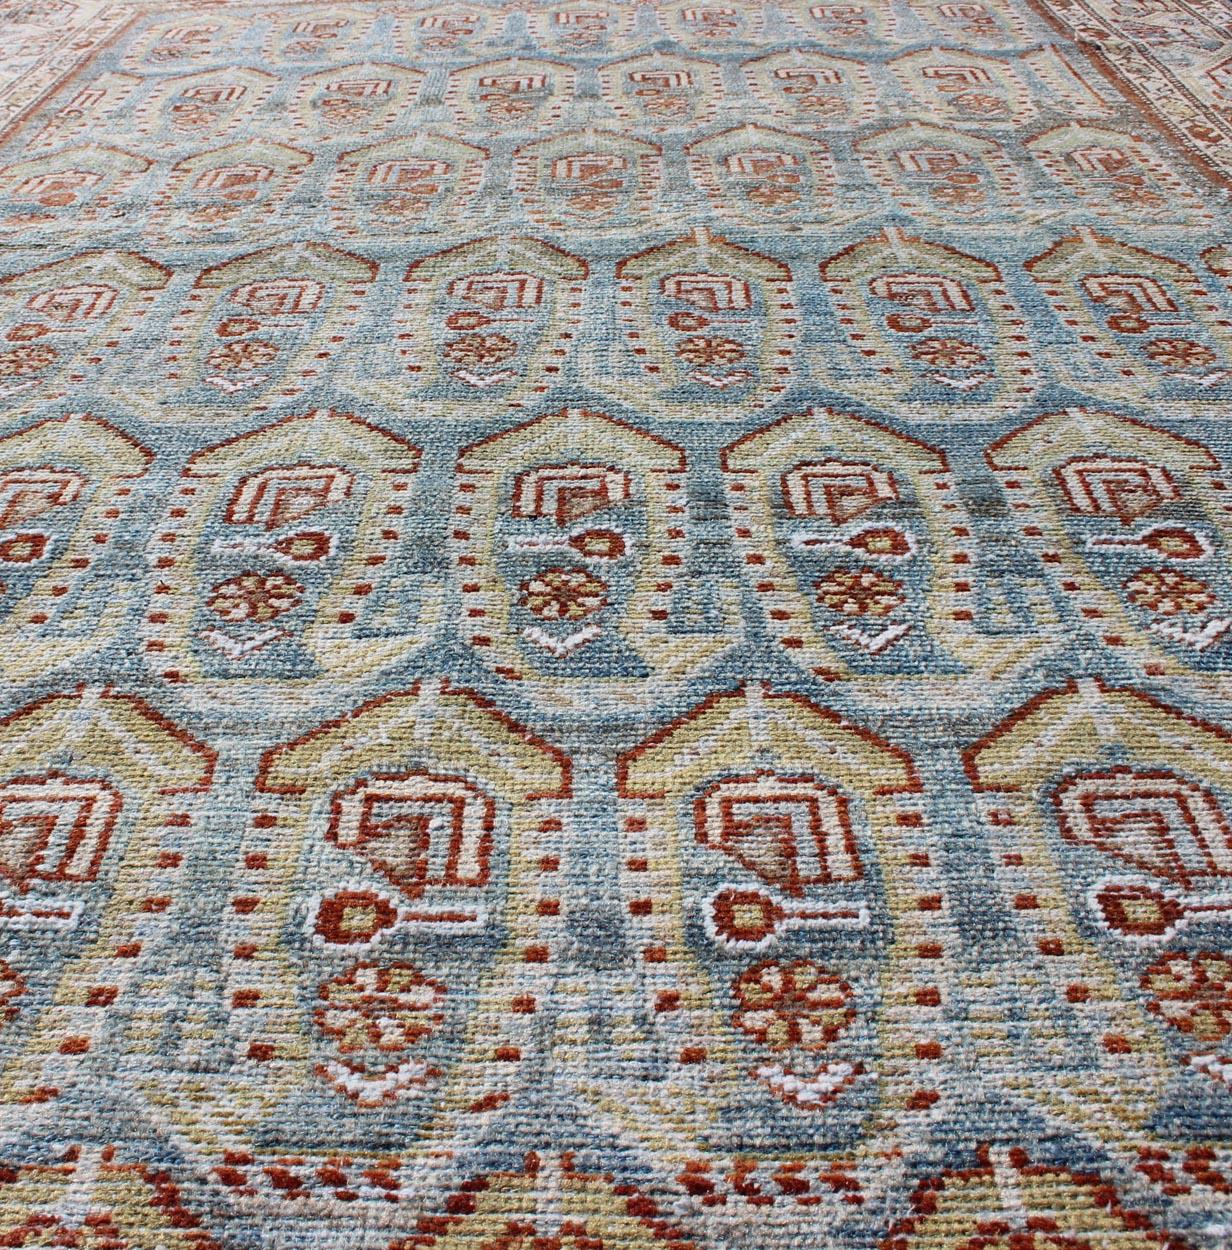 Early 20th Century All-Over Paisley Pattern Antique Persian Malayer Rug in Blue and Red For Sale